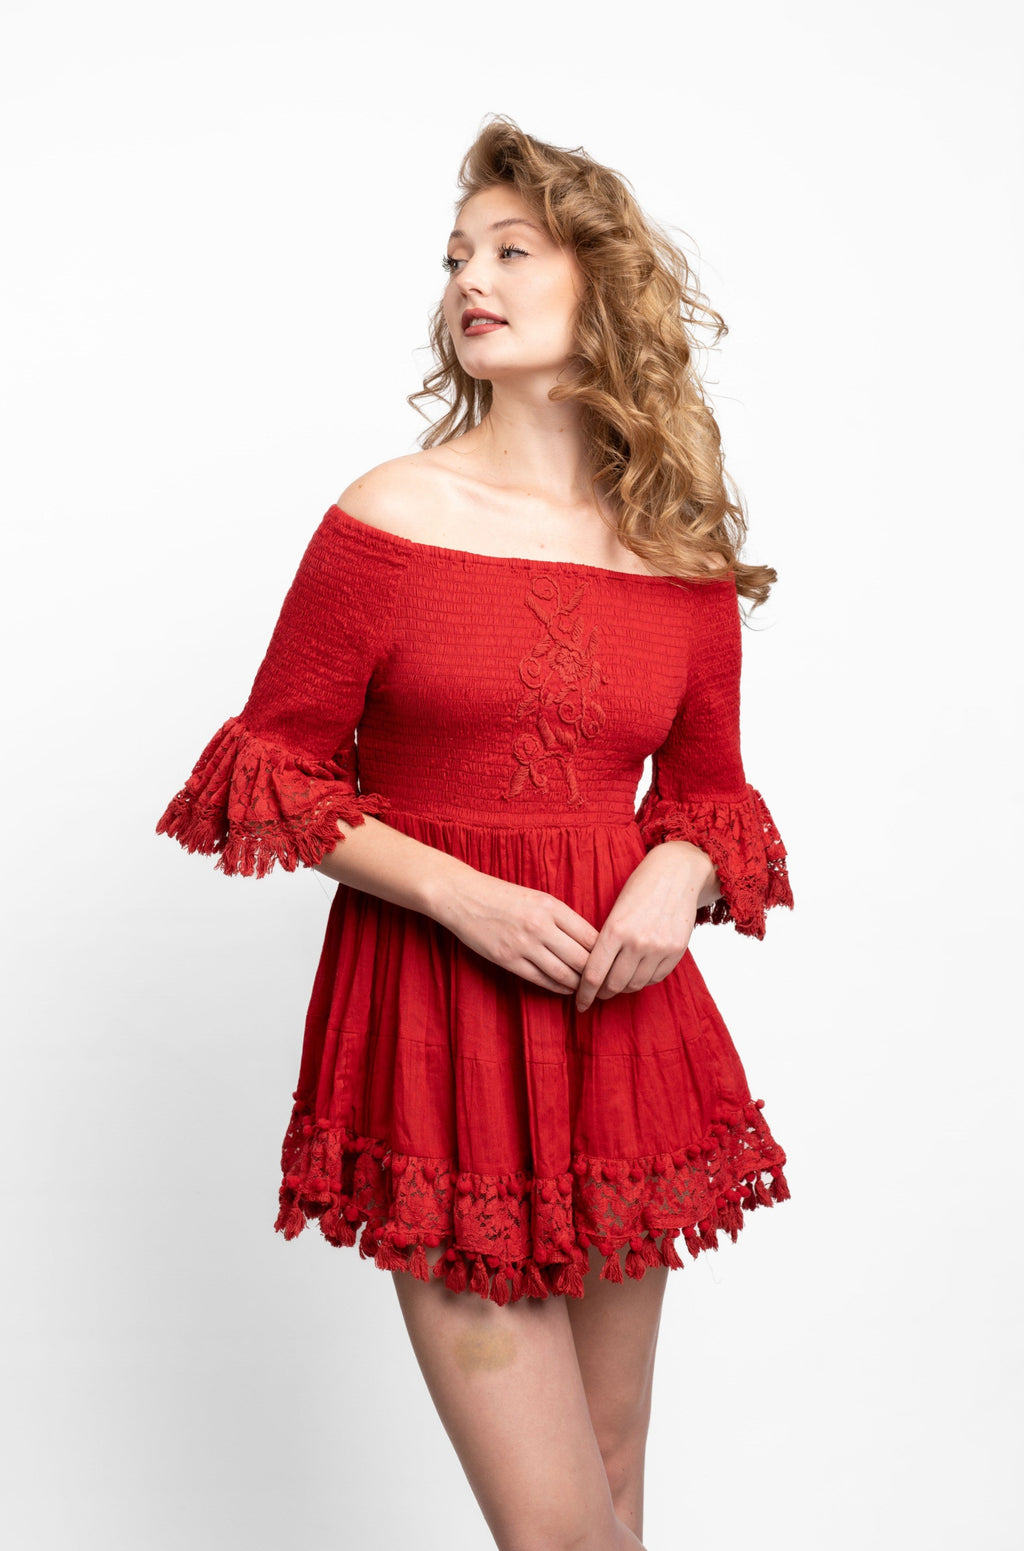 AMT S23 Red dress